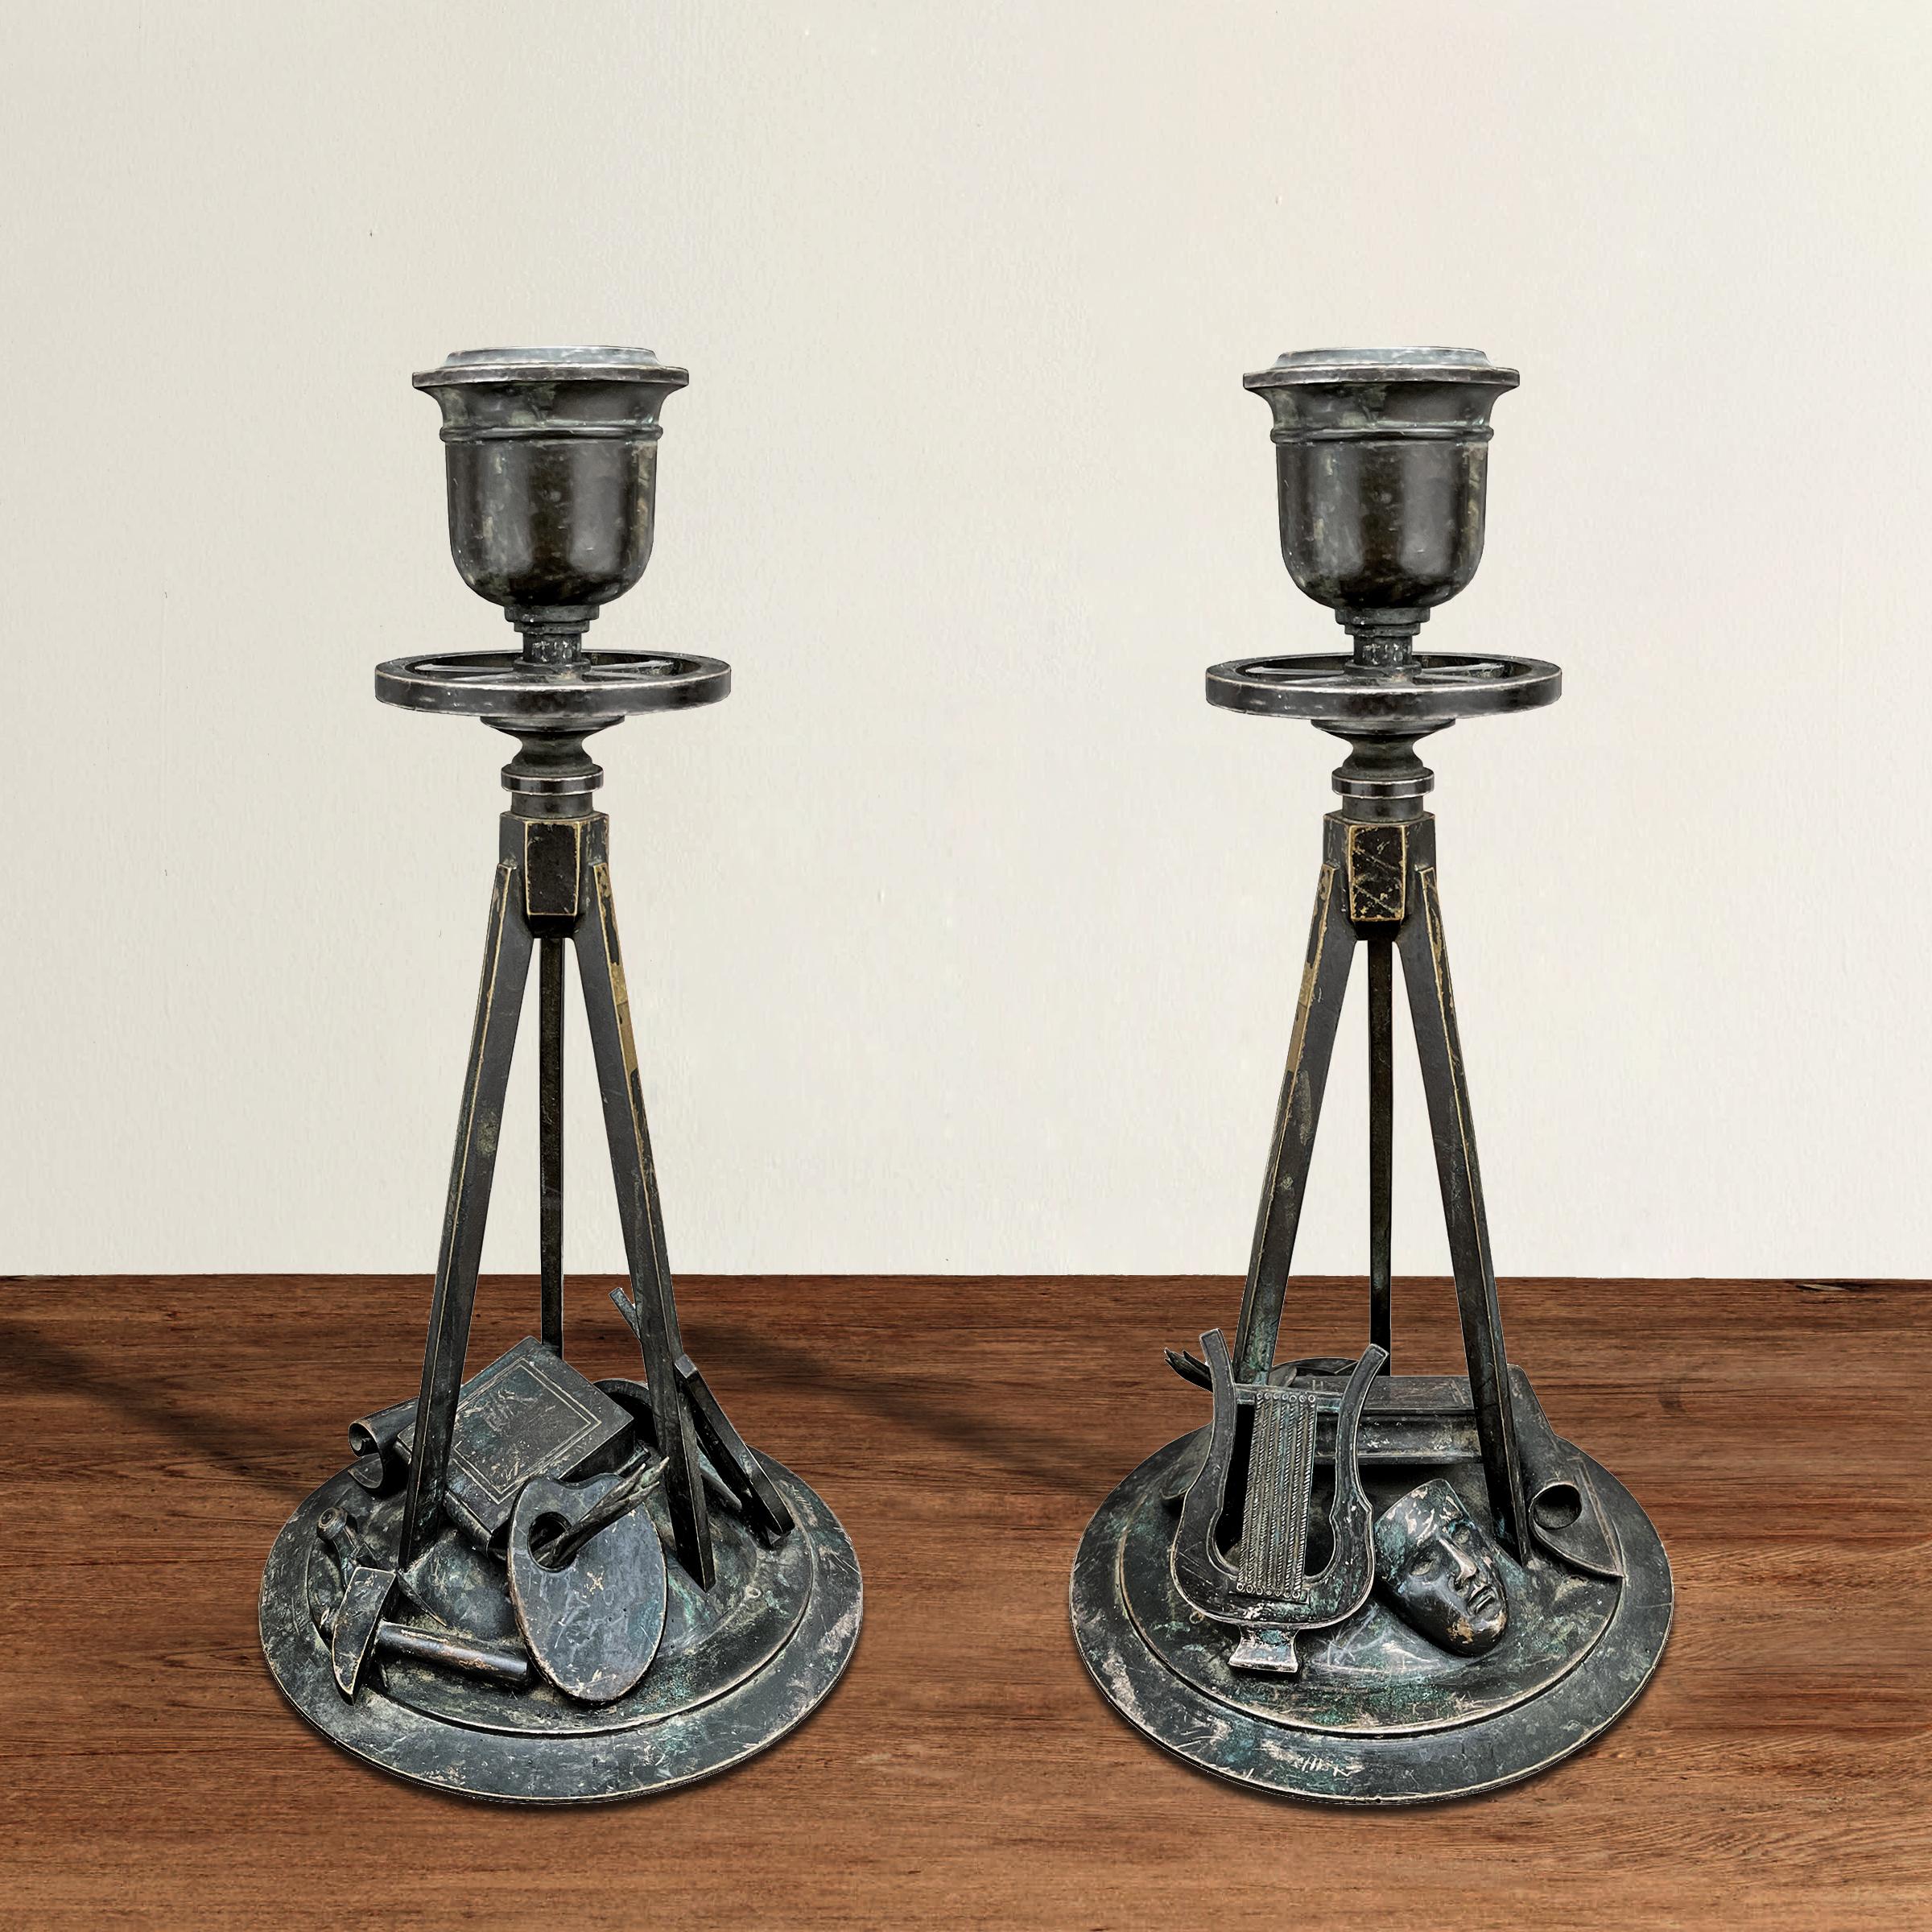 An incredible pair of spirited early 19th century French Empire bronze candlesticks celebrating the arts with individually cast and applied painters' palettes with brushes, sculptors' hammers and compasses, writers' books, musicians' harps, drama